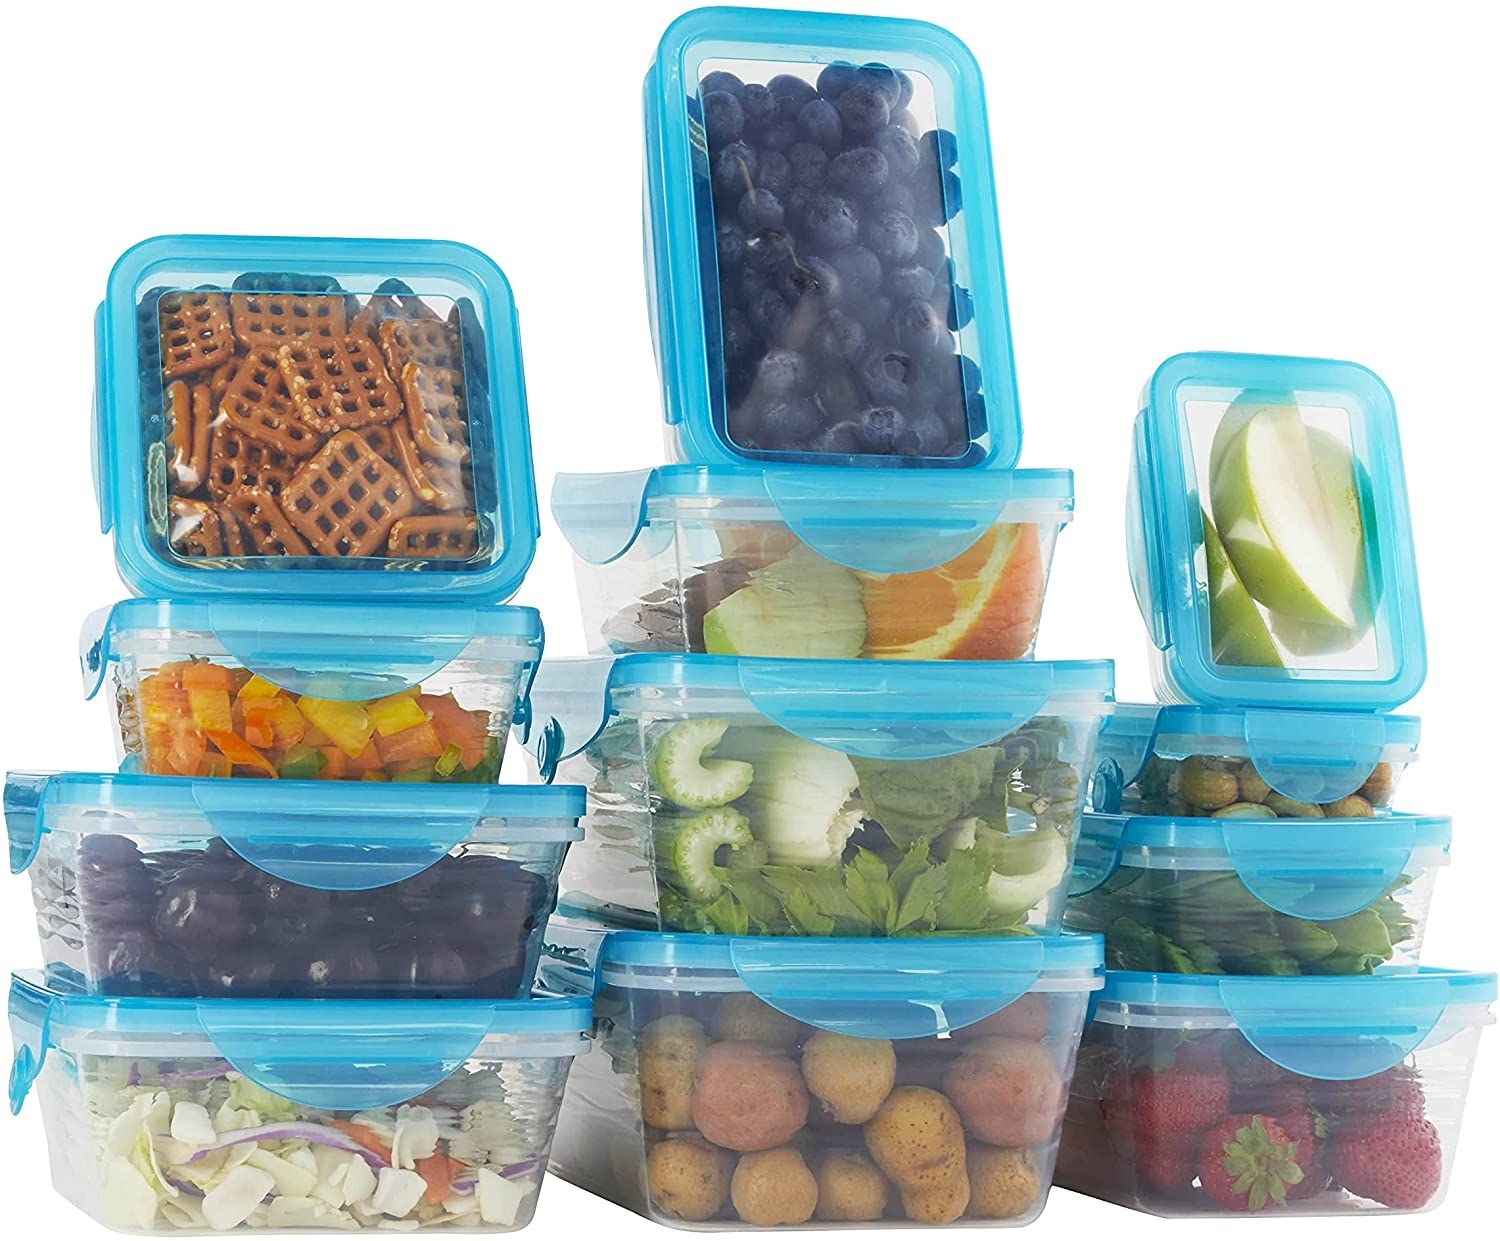 Different sizes of food storage containers with different food inside, blue lids